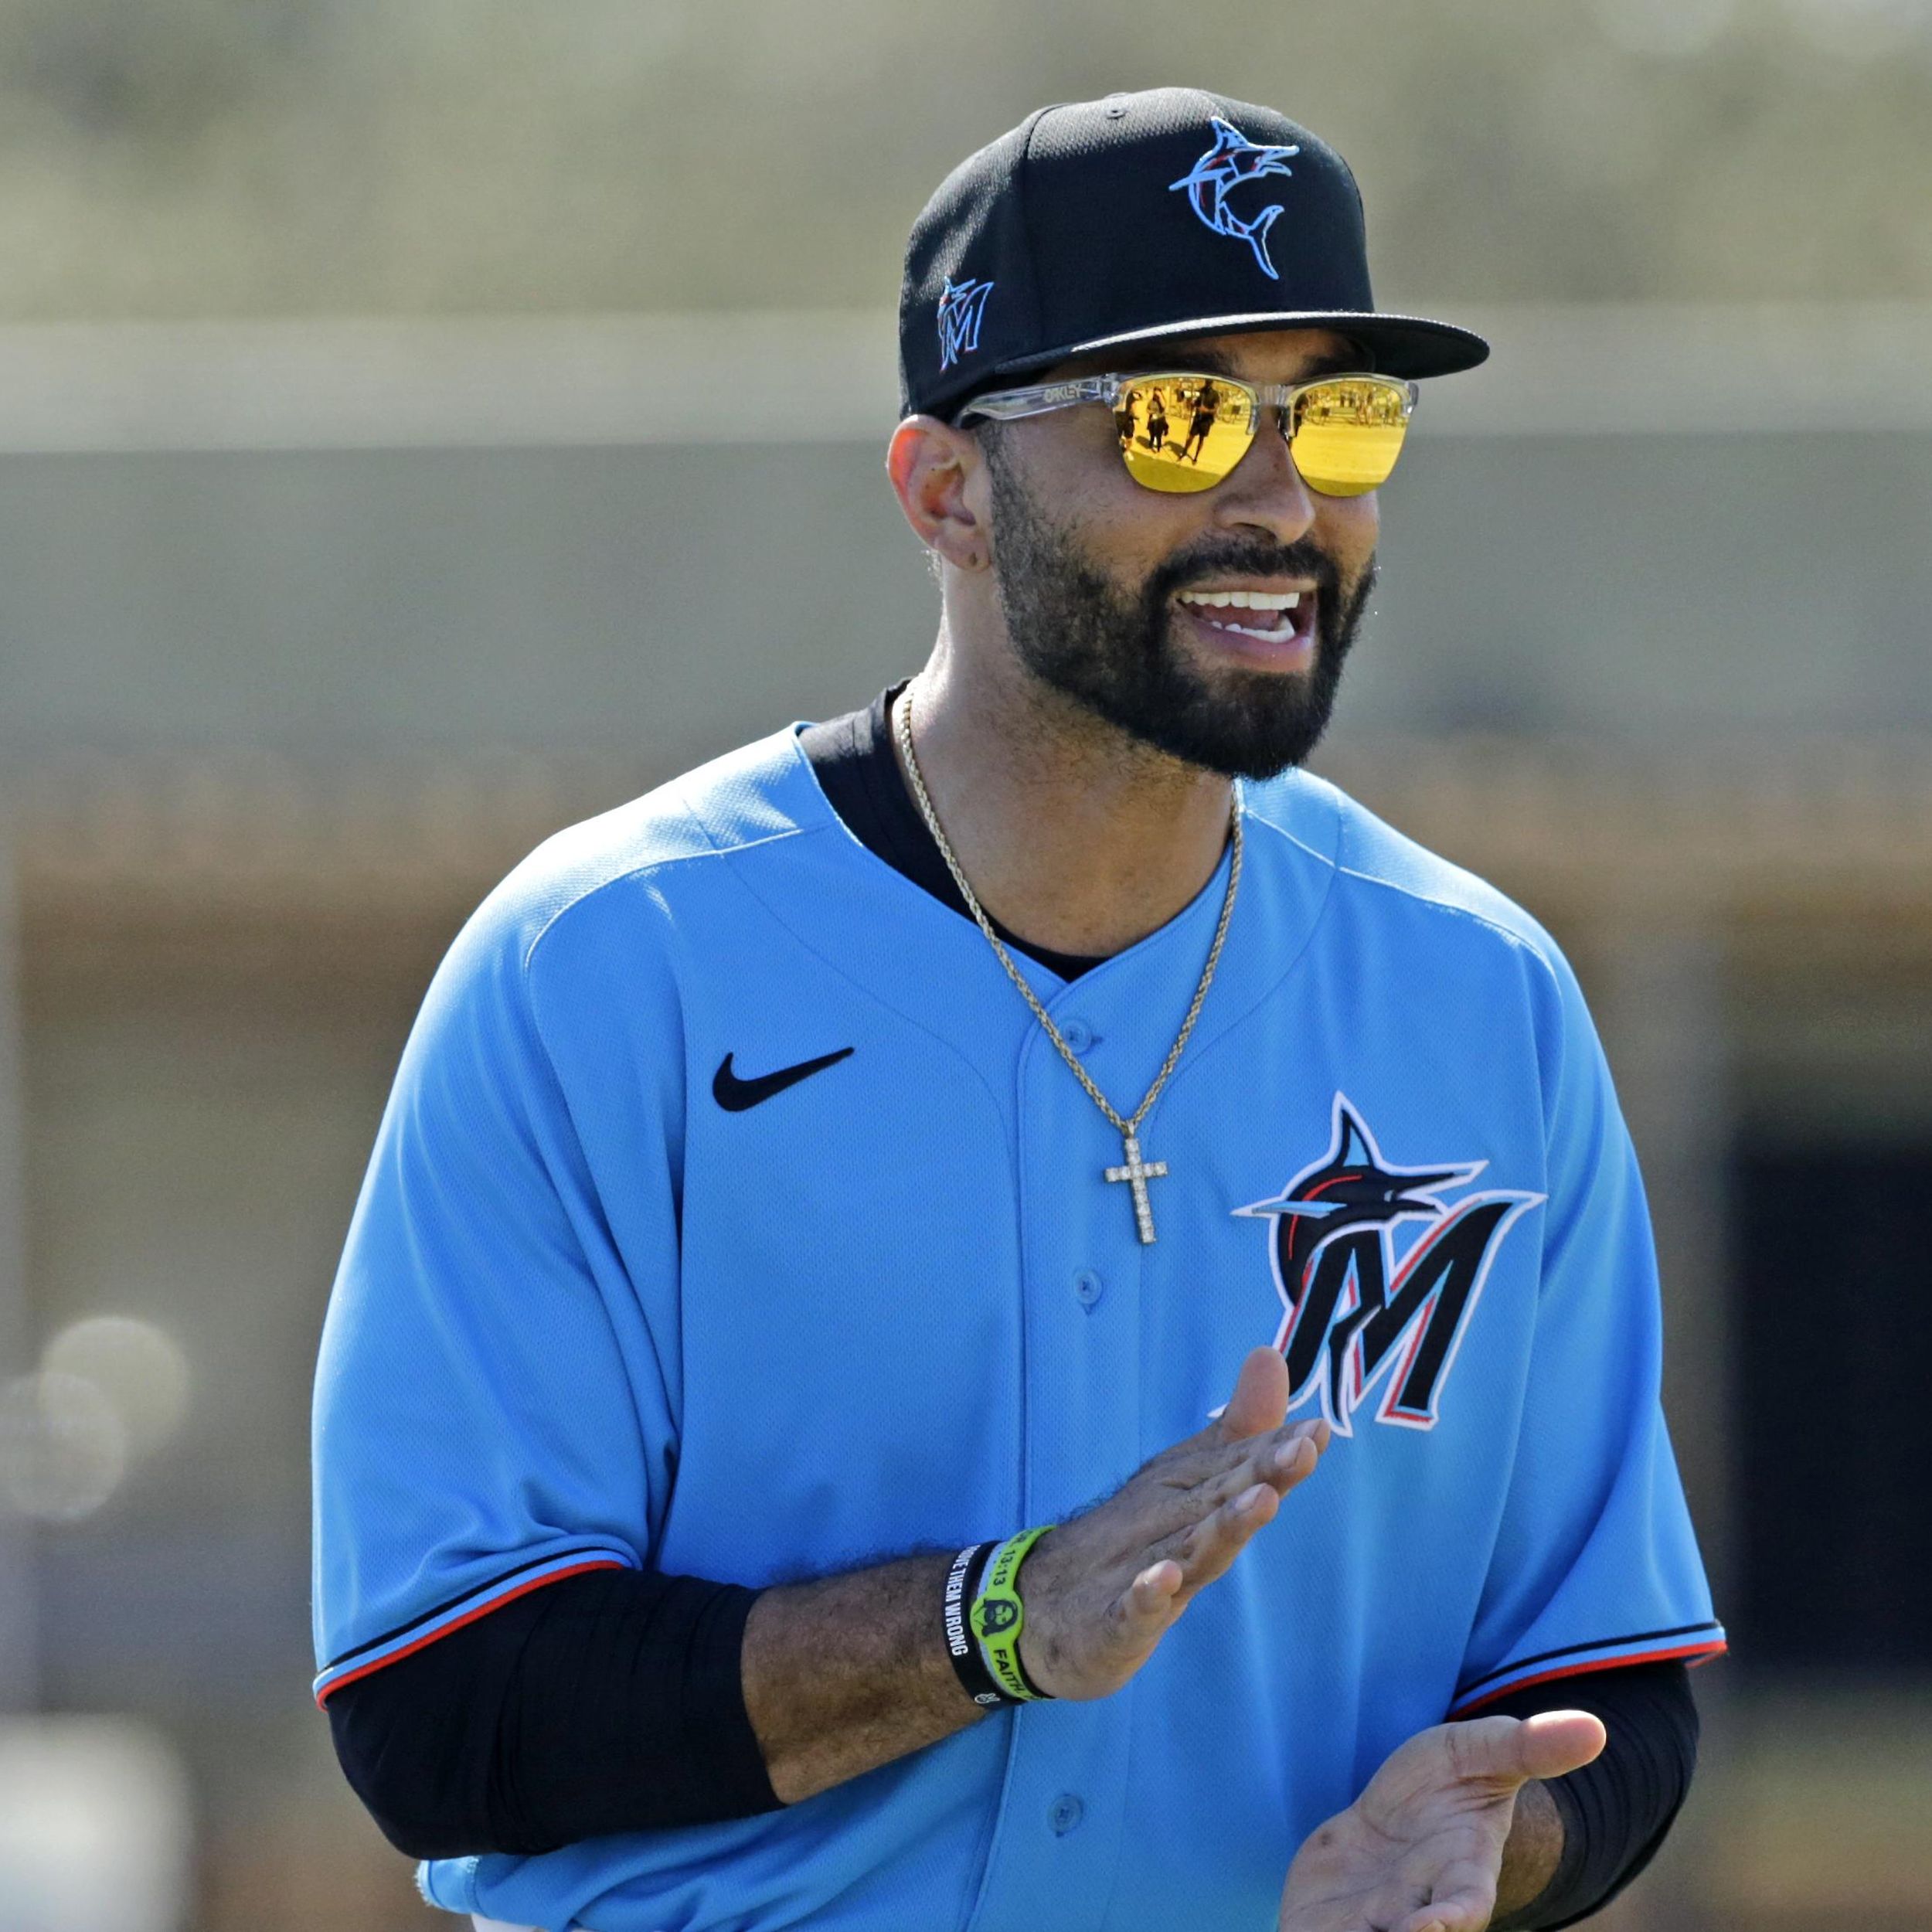 The wall won' – Matt Kemp tries to revive career with Marlins